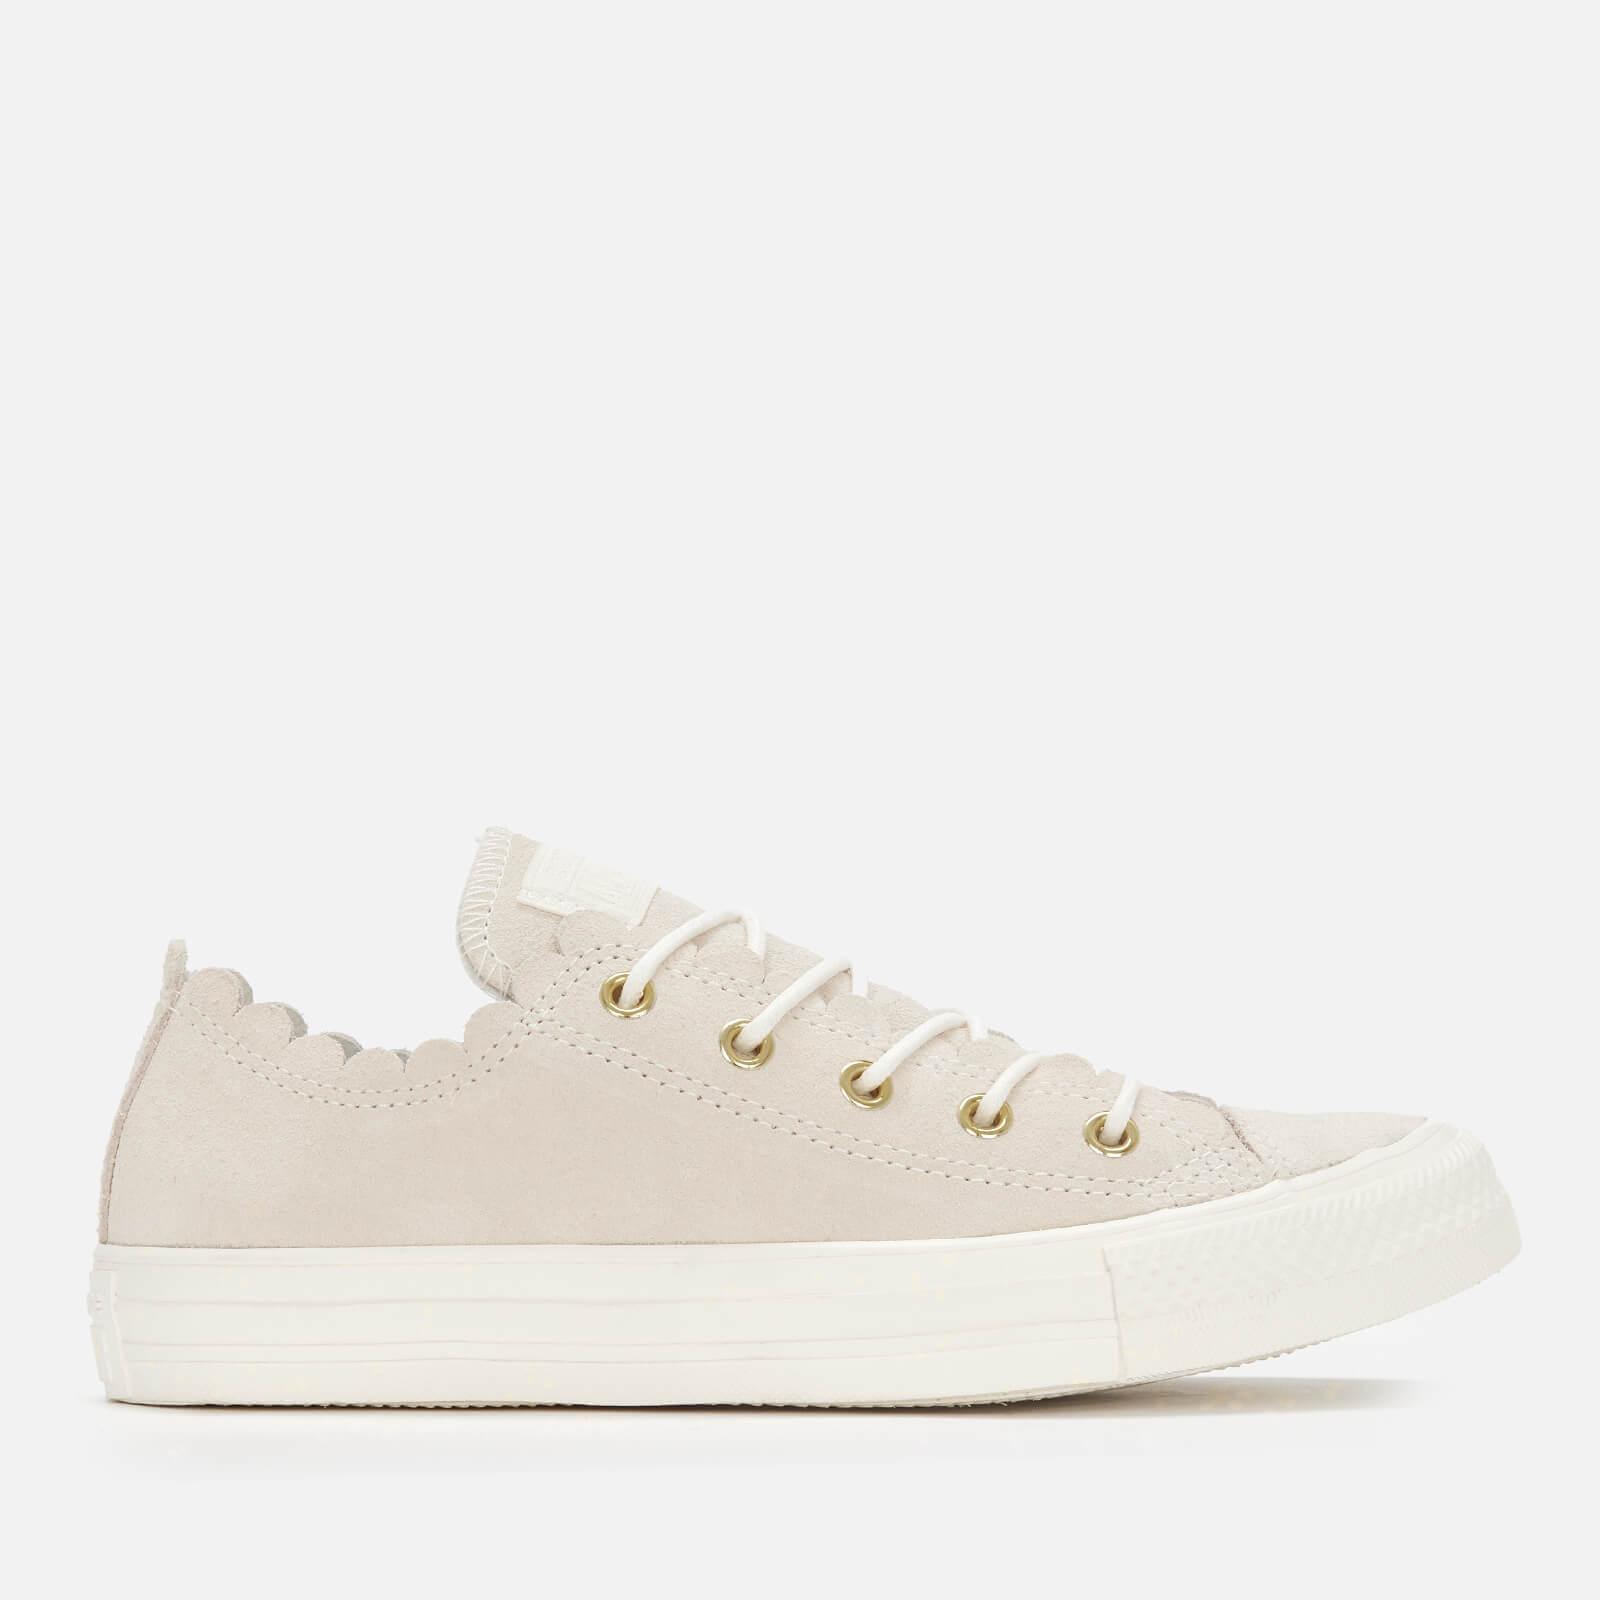 Converse Chuck Taylor All Star Scalloped Edge Ox Trainers | Lyst